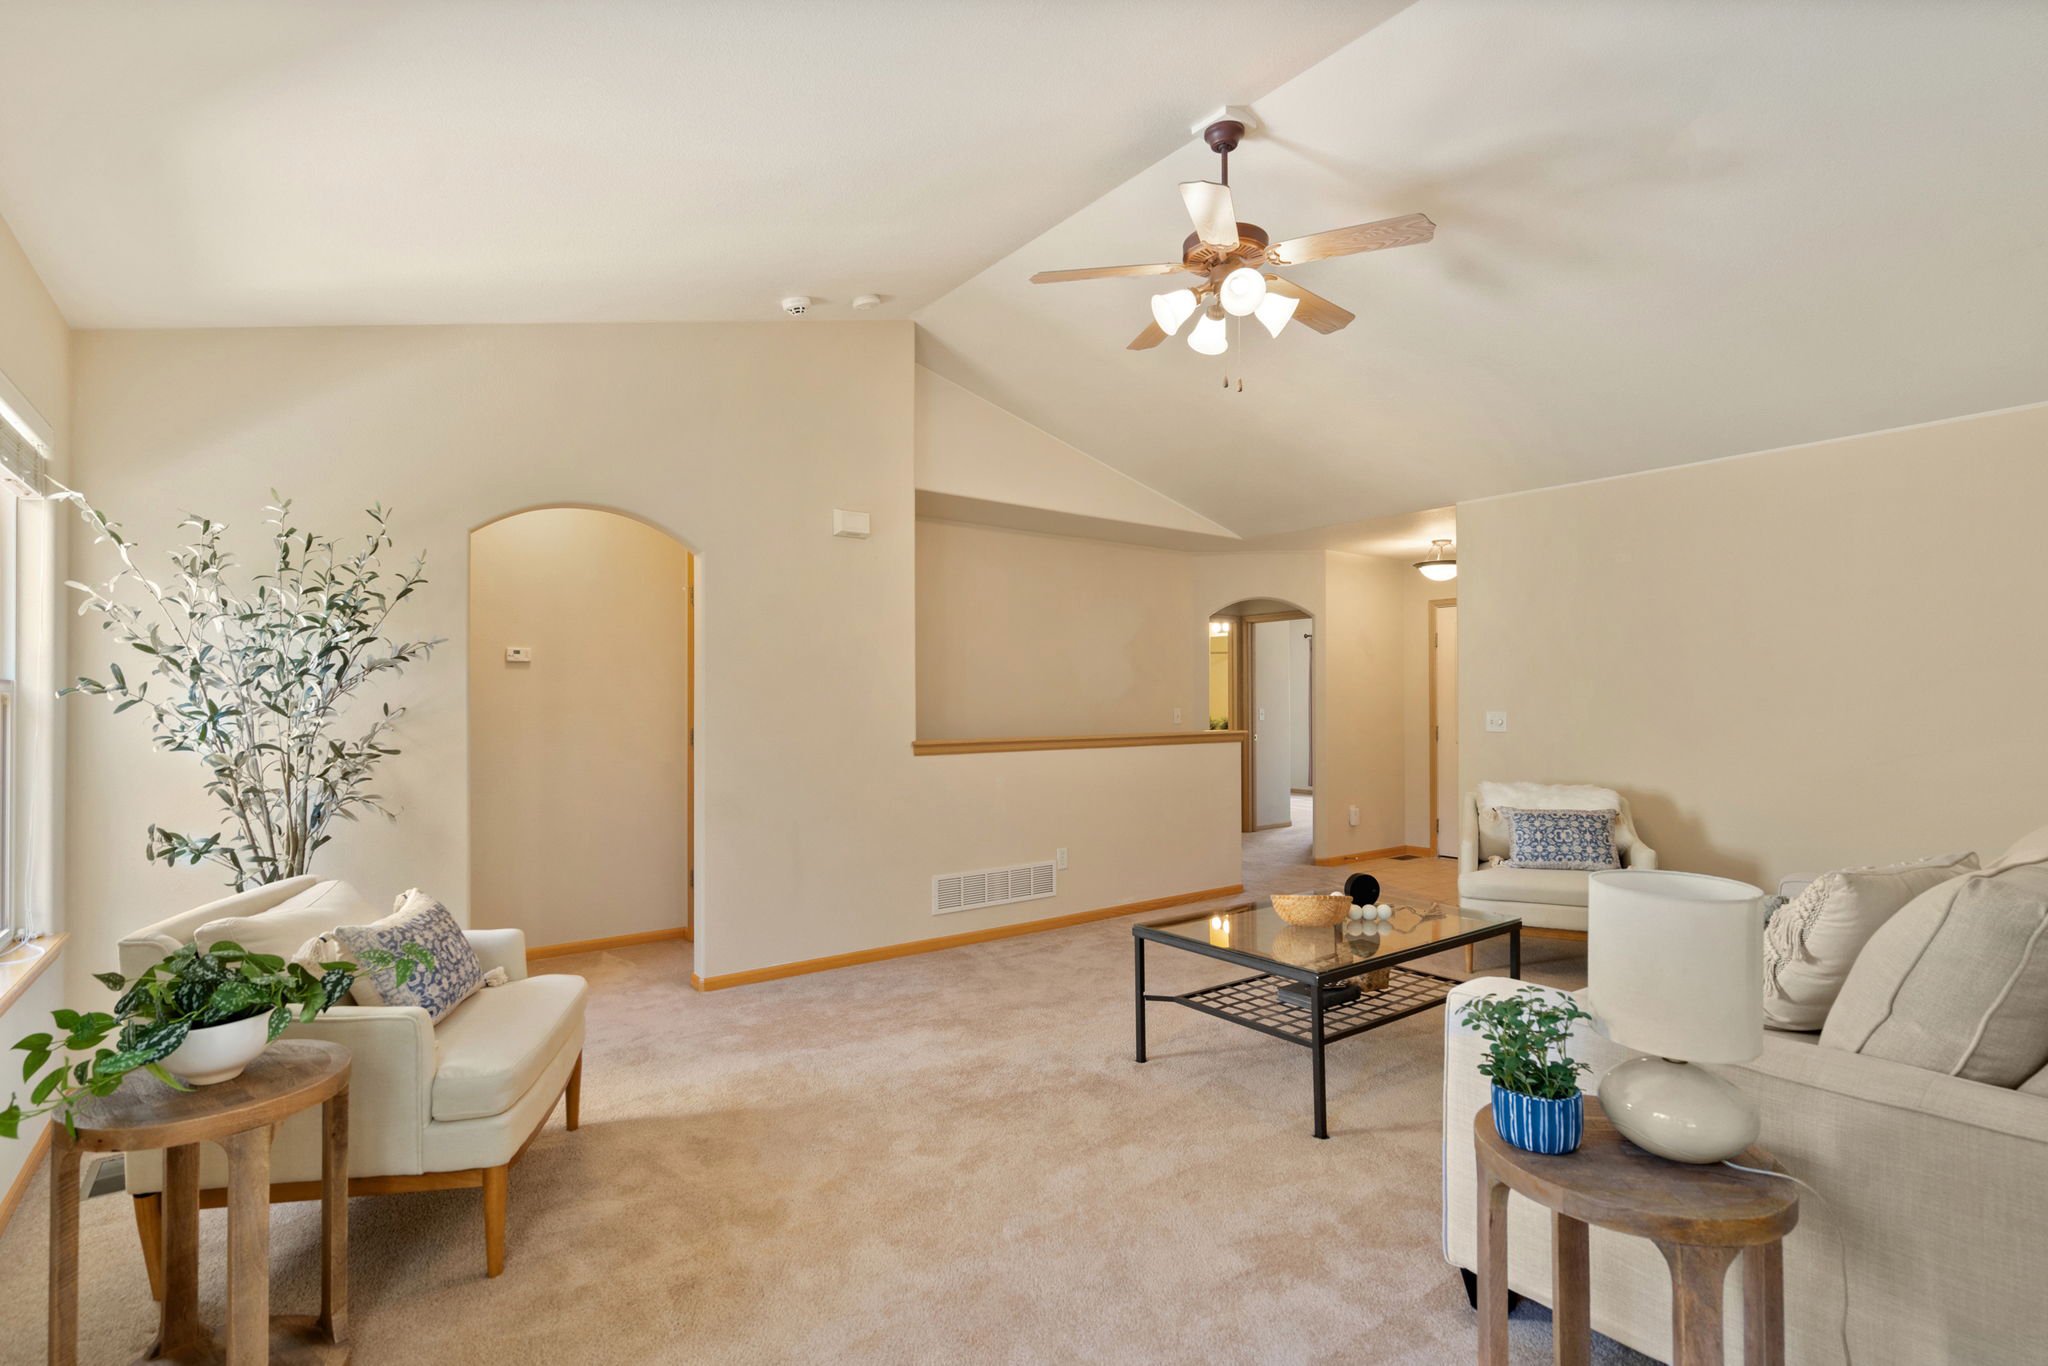 Open Layout w/ Vaulted Ceilings